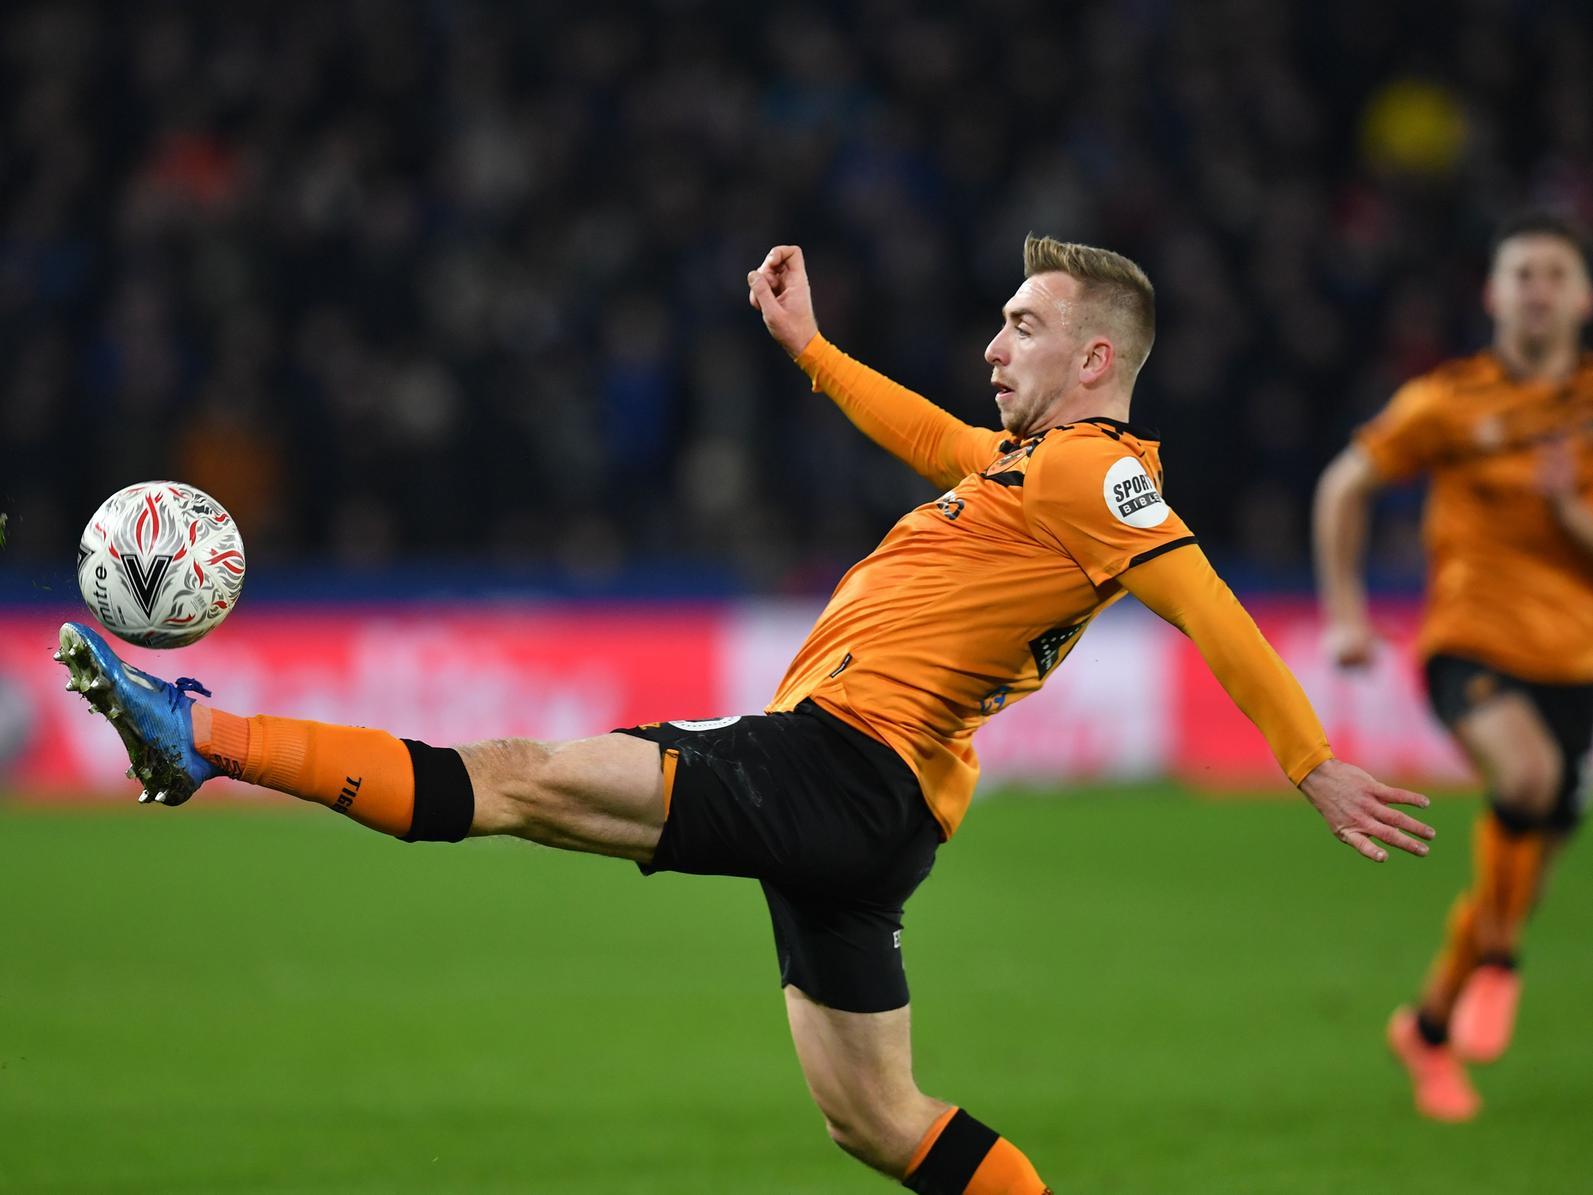 Jarrod Bowen has signed for West Ham United. The forward signed from Hull City, and was also a target for Leeds United, Newcastle United and Sheffield United. (Various)